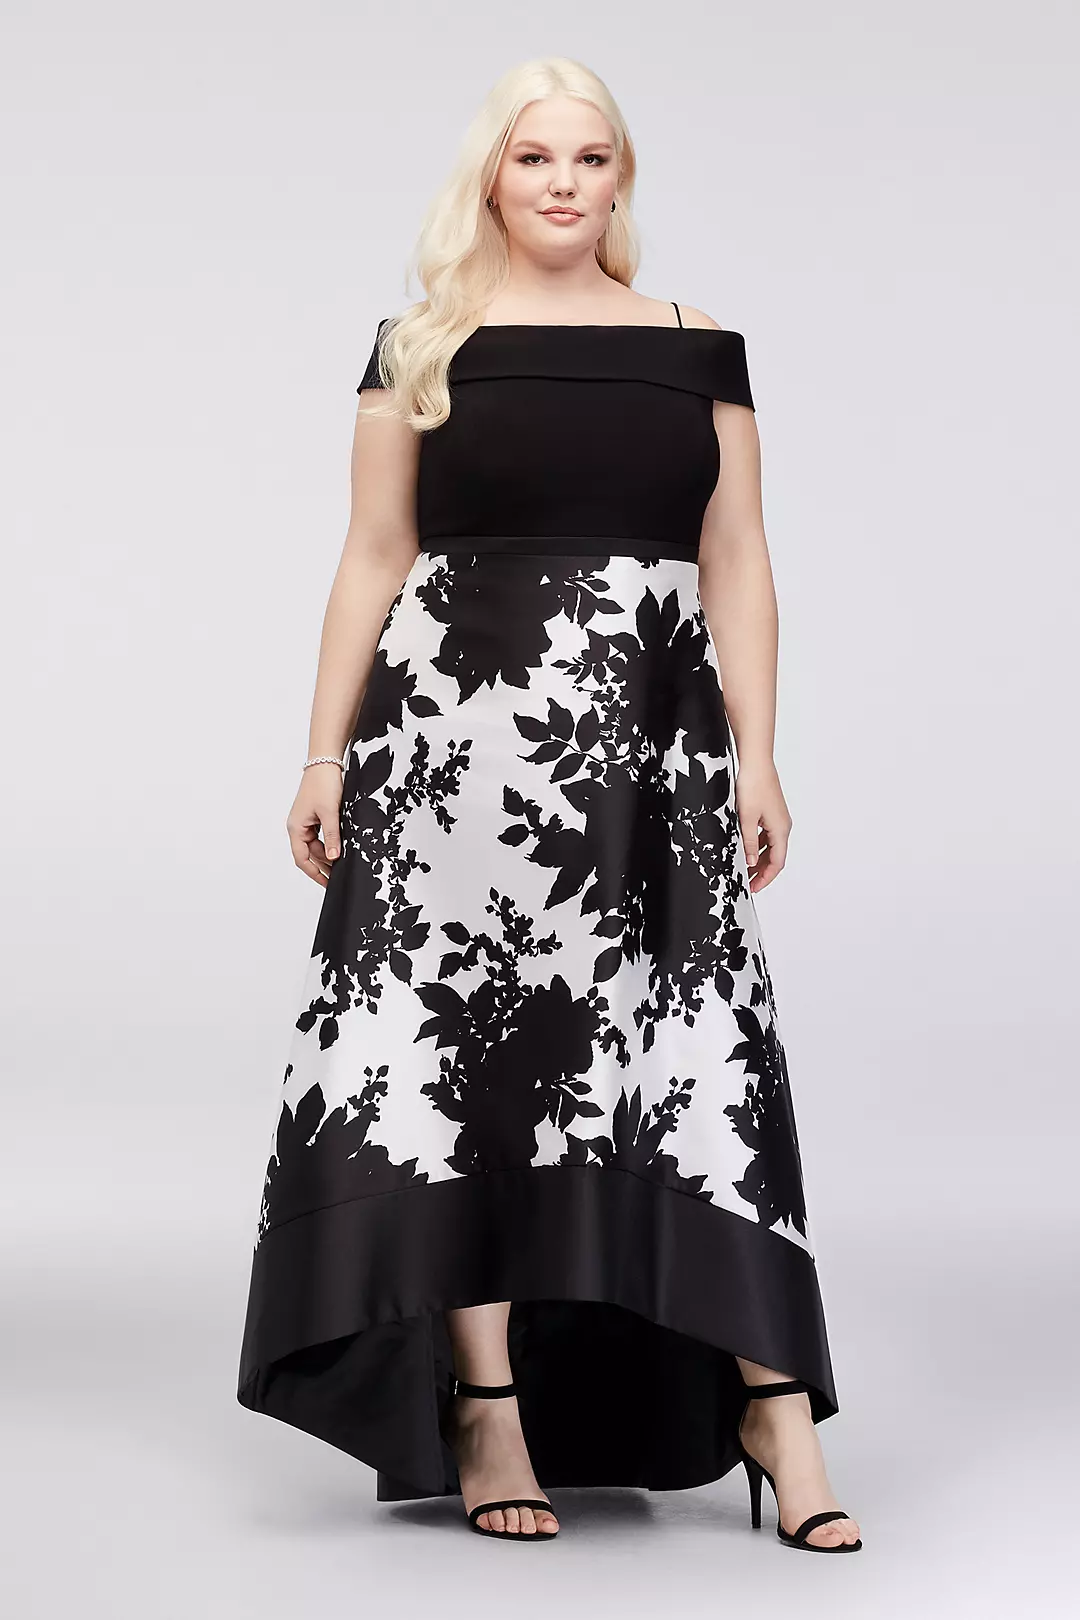 Off-the-Shoulder Ball Gown with Floral Print Skirt Image